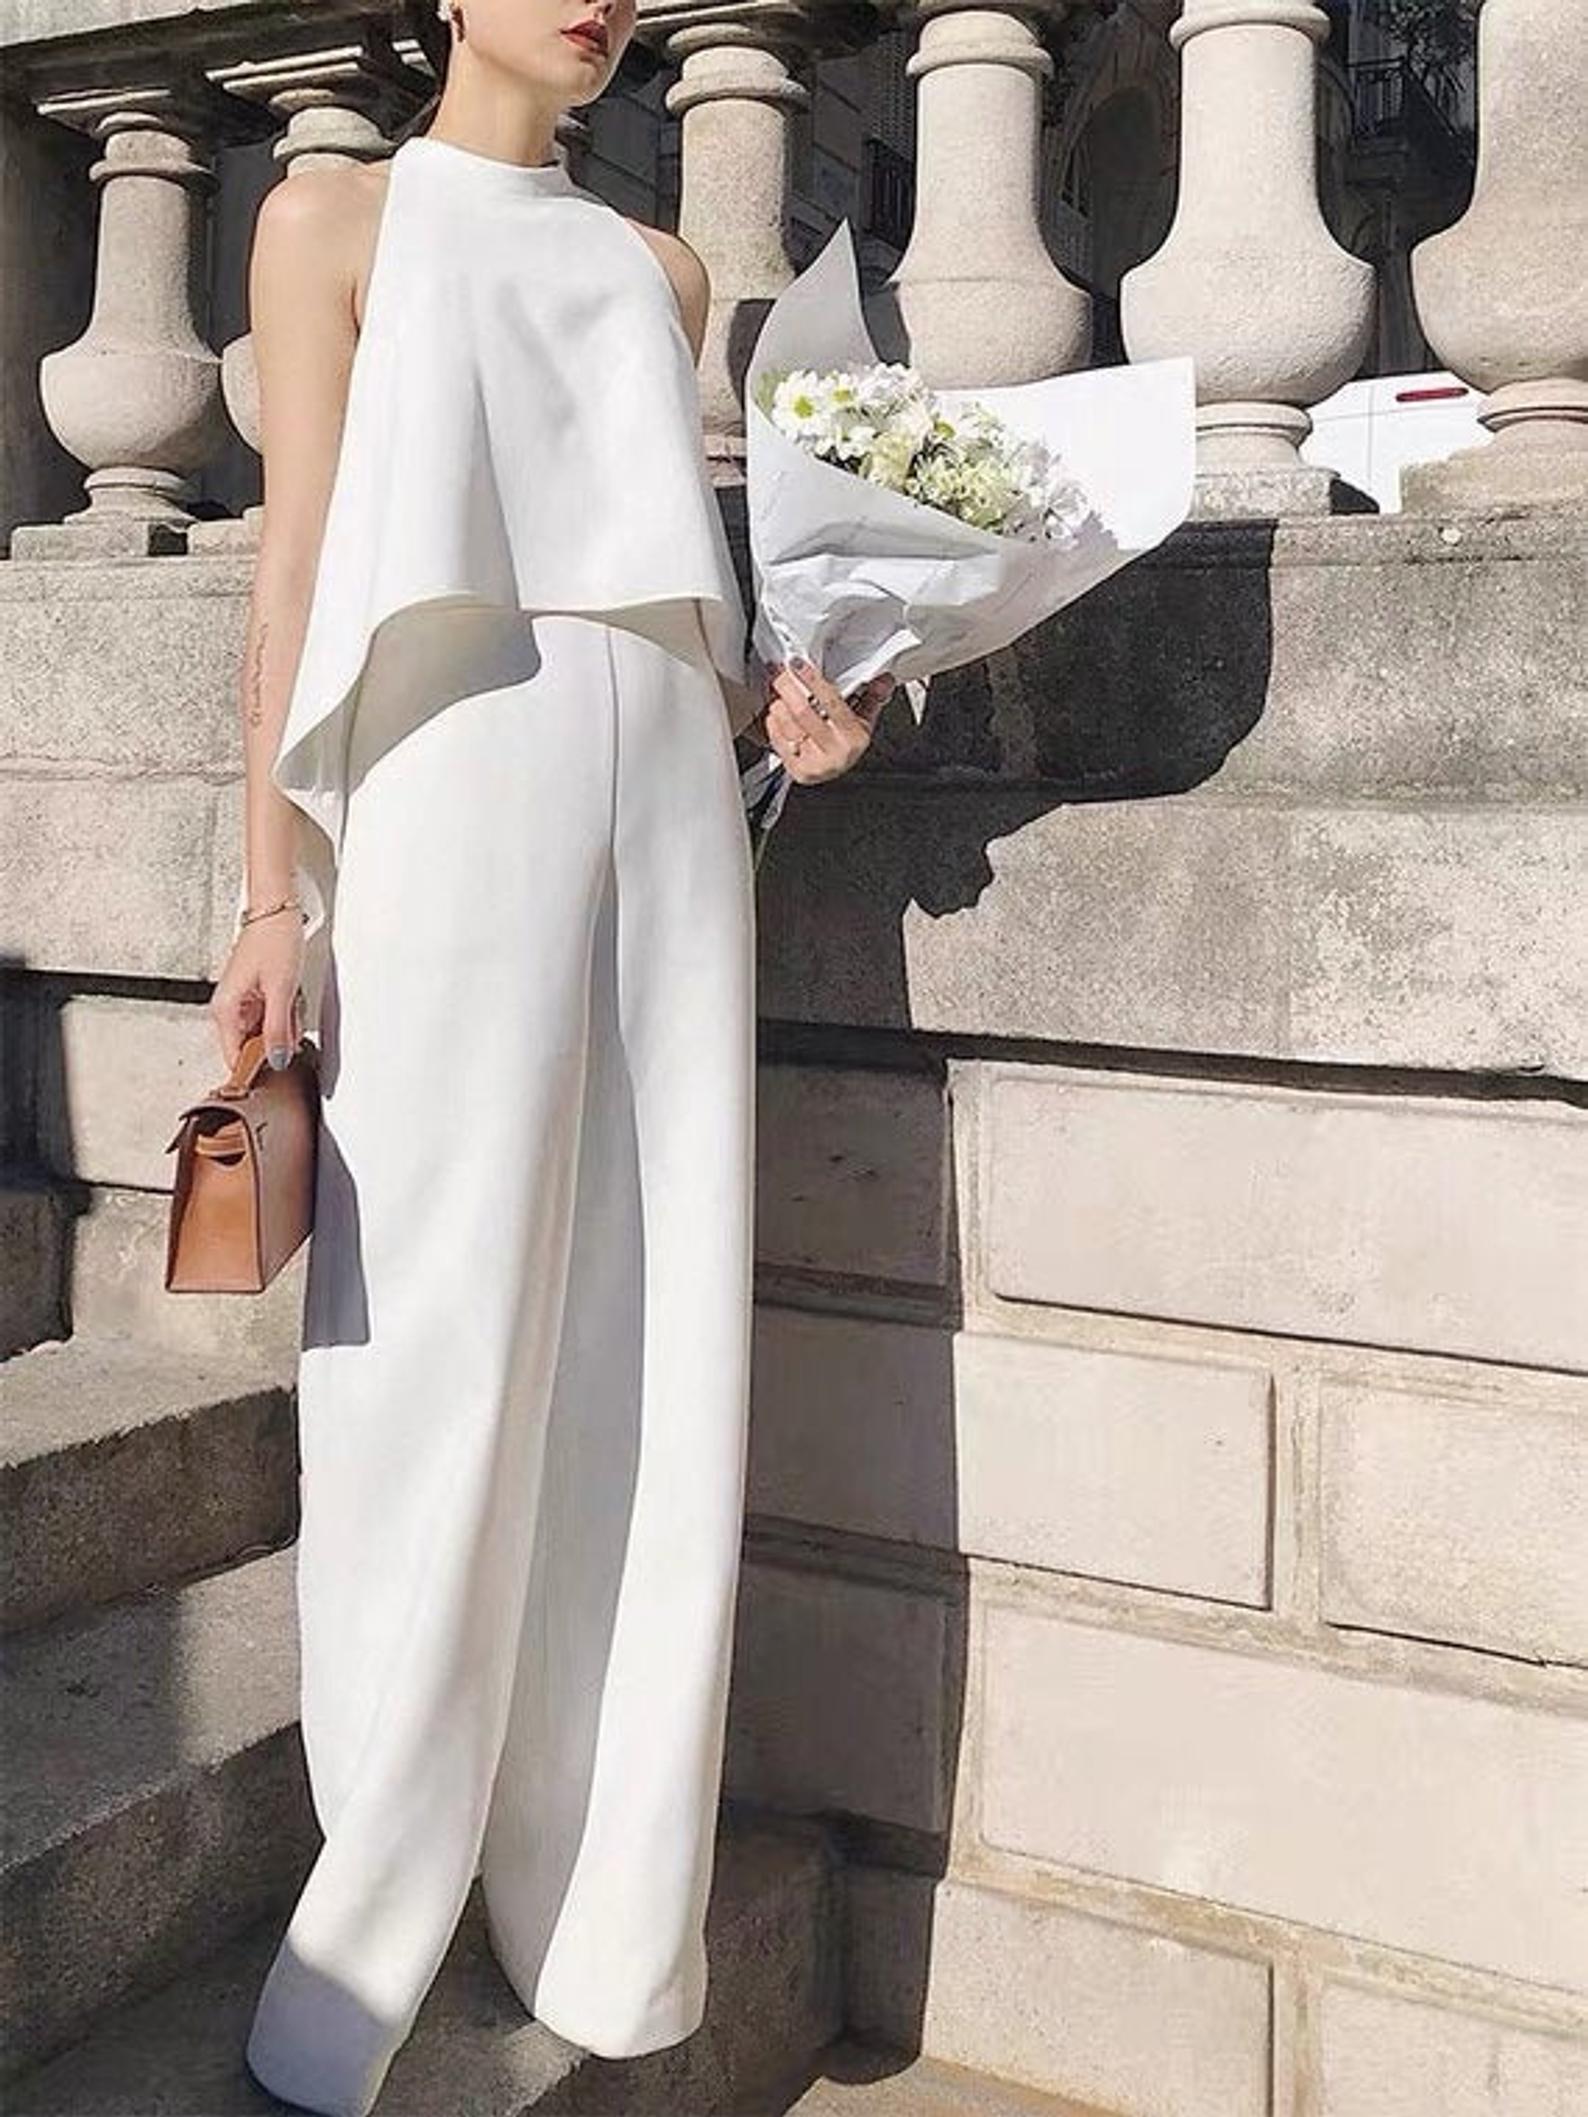 The Best Jumpsuits For Weddings, Brides and Bridesmaids